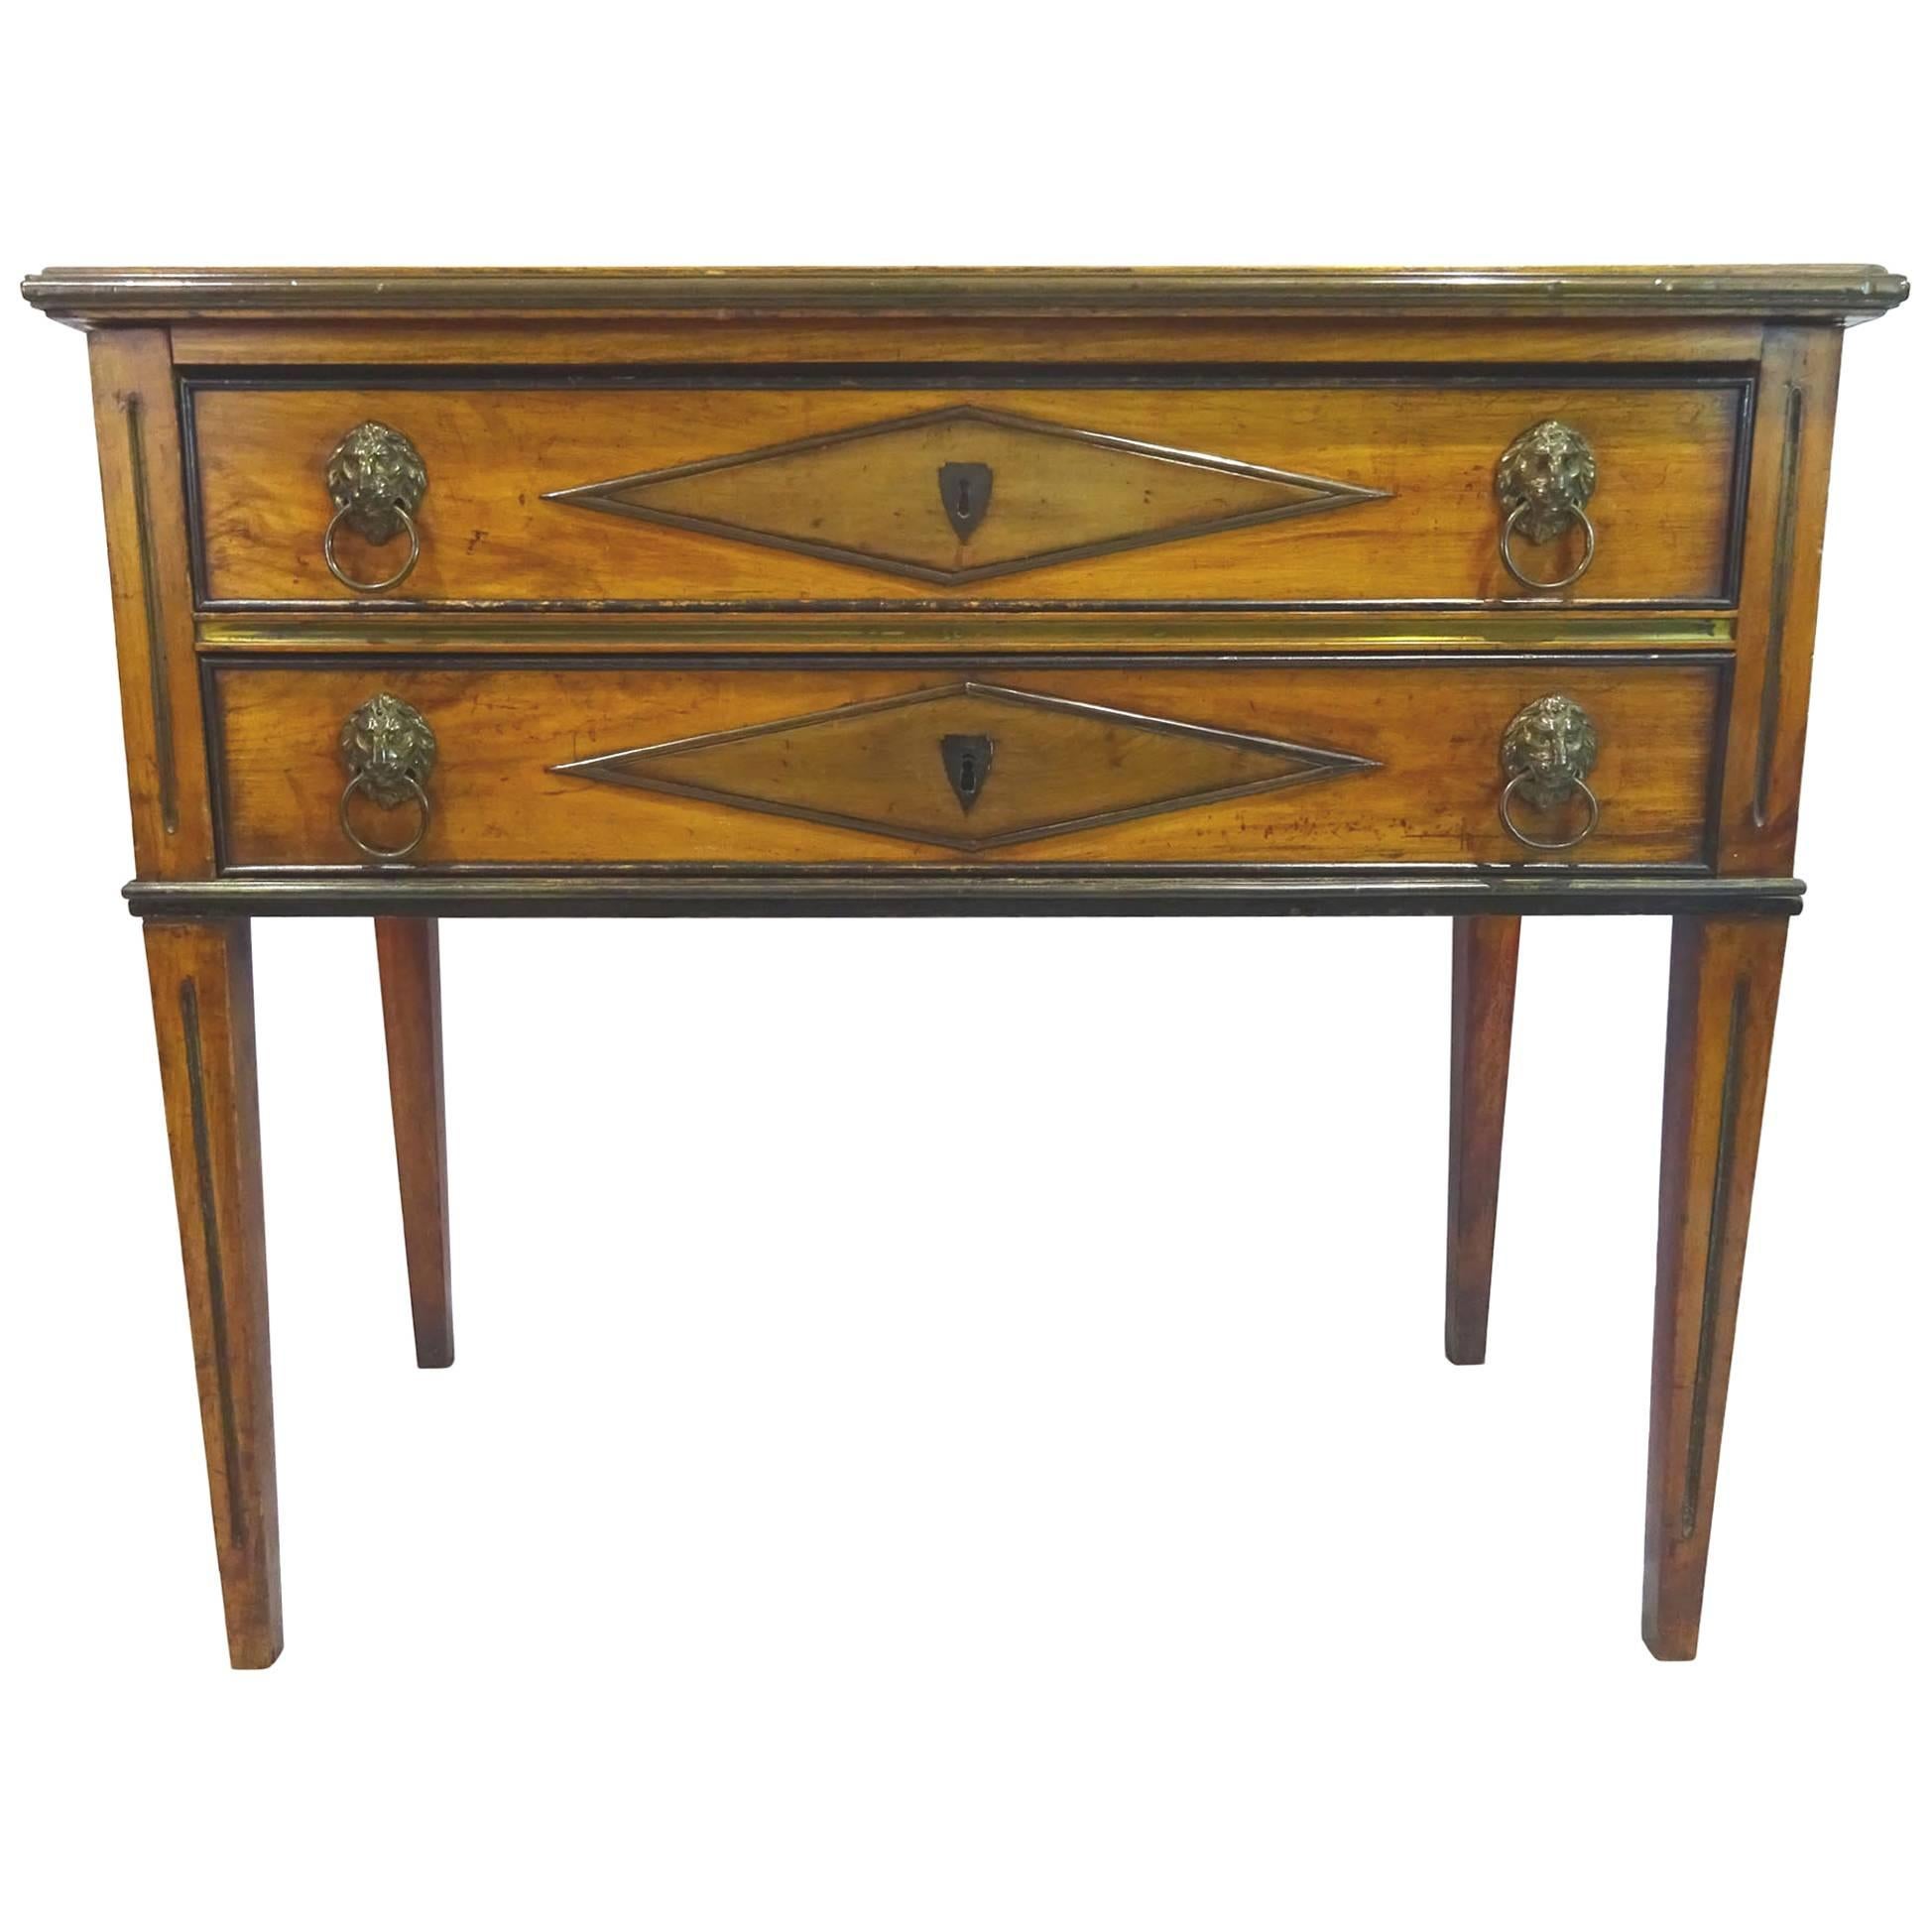 Early 19th Century Danish Directoire Style Chest